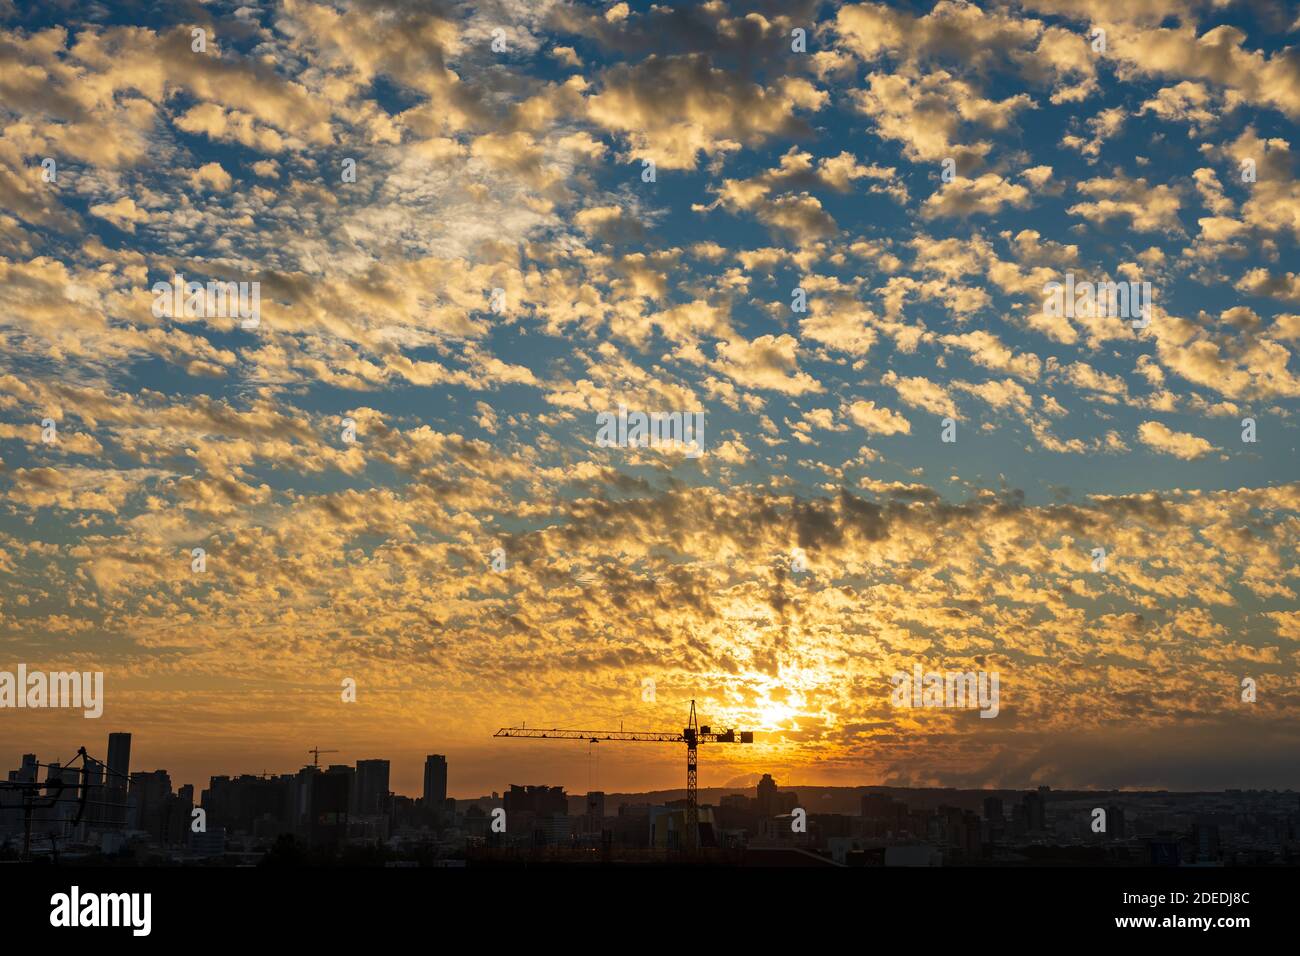 Cranes in the foreground and colorful altocumulus clouds sky in background in sunset time. City landscape at dusk. A concept of economic development. Stock Photo